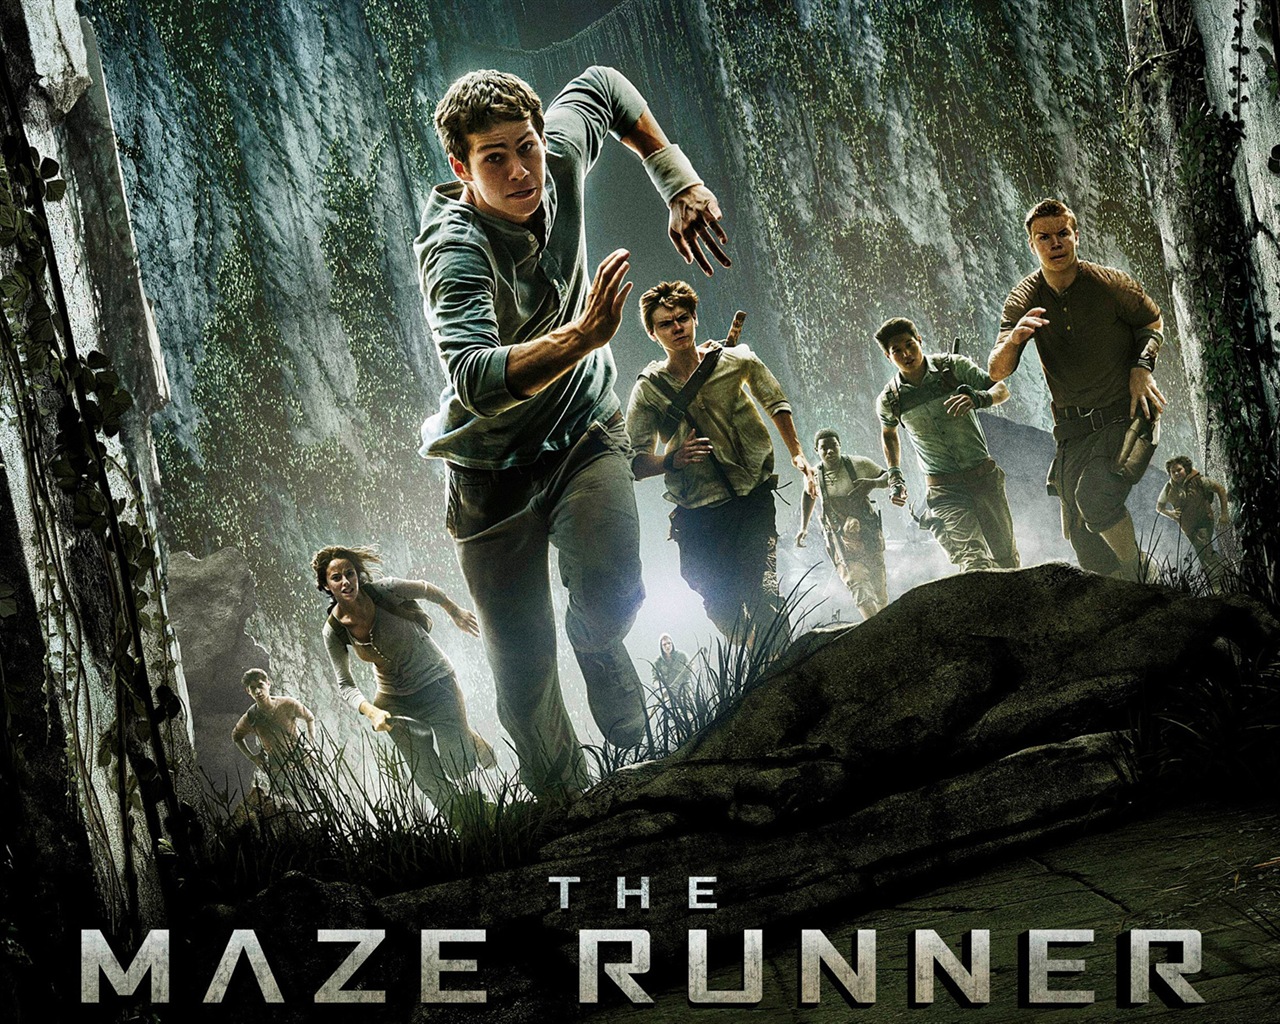 The Maze Runner HD movie wallpapers #2 - 1280x1024